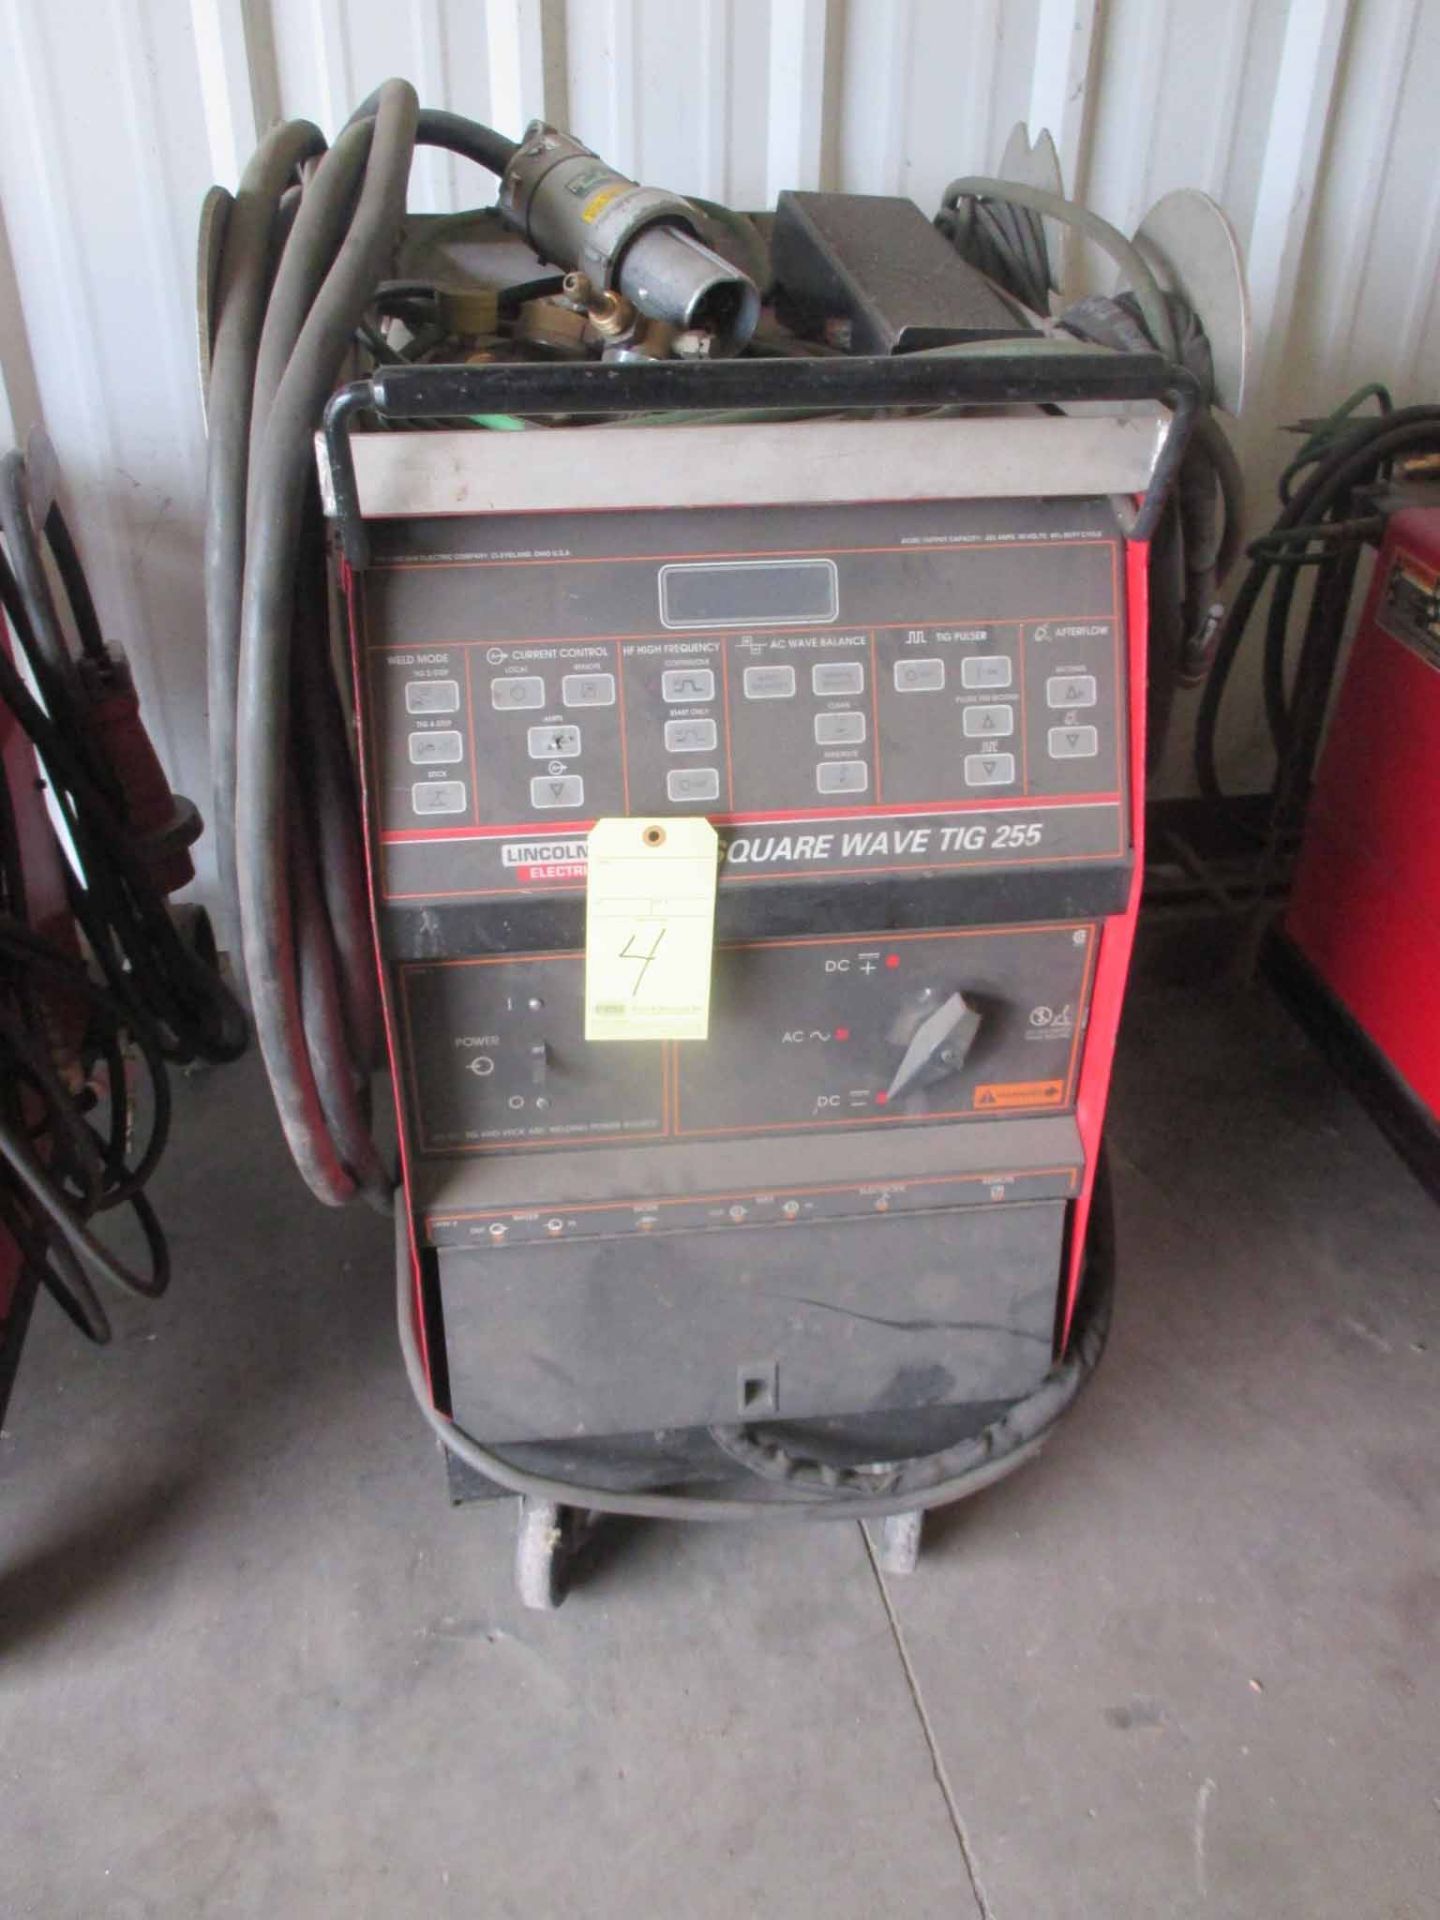 WELDER, LINCOLN SQUARE WAVE TIG 255, 40% duty cycle, 255 amps., 31 v., S/N U1960512468